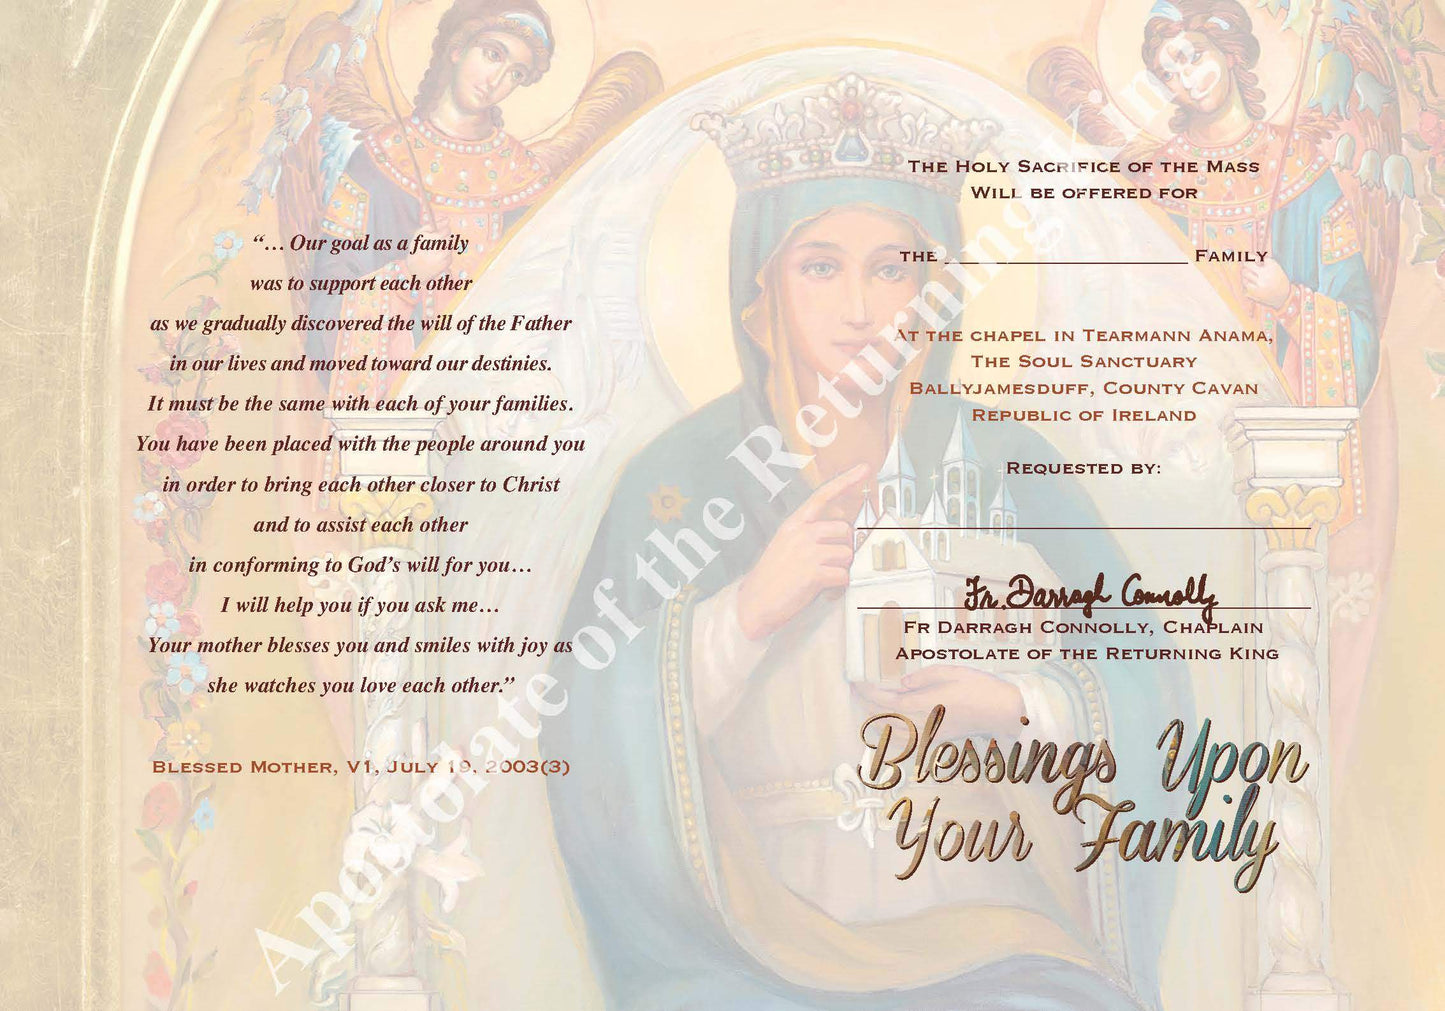 A Family Blessing Mass Card